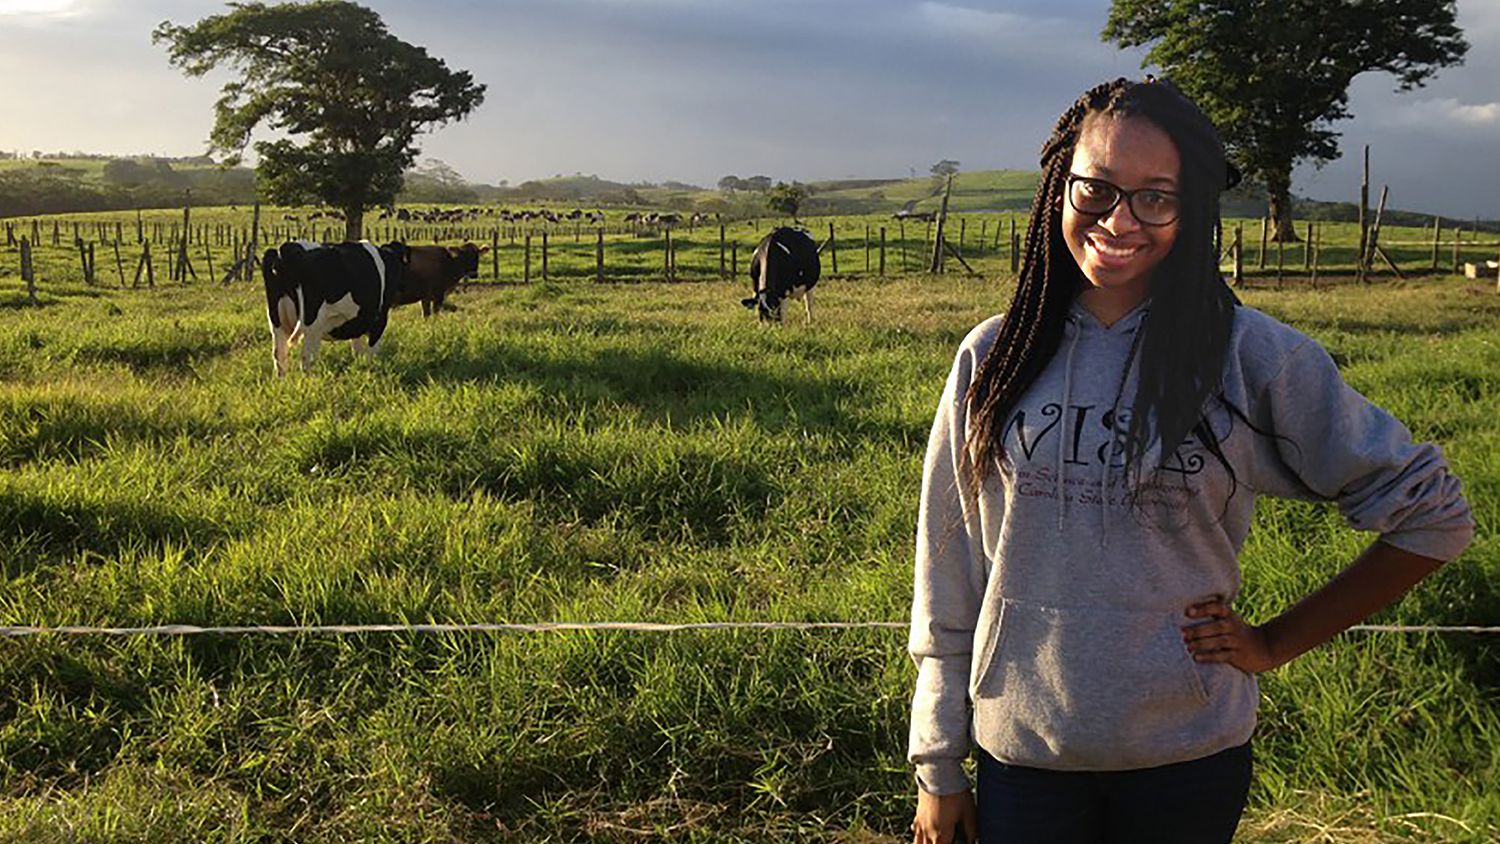 CALS student Nashea Williams standing in front of cows in a field.